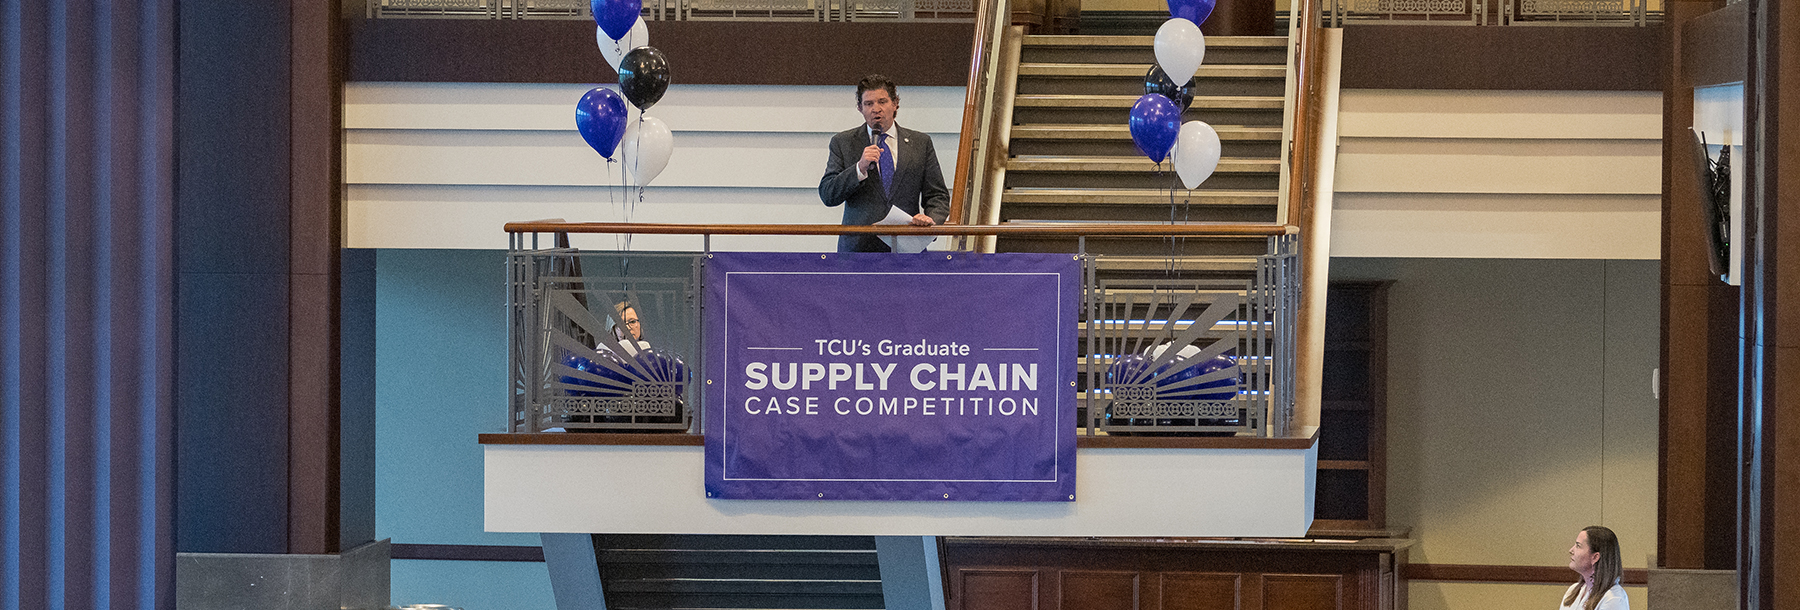 Section Image: TCU President Pullin addresses the crowd from the balcony 